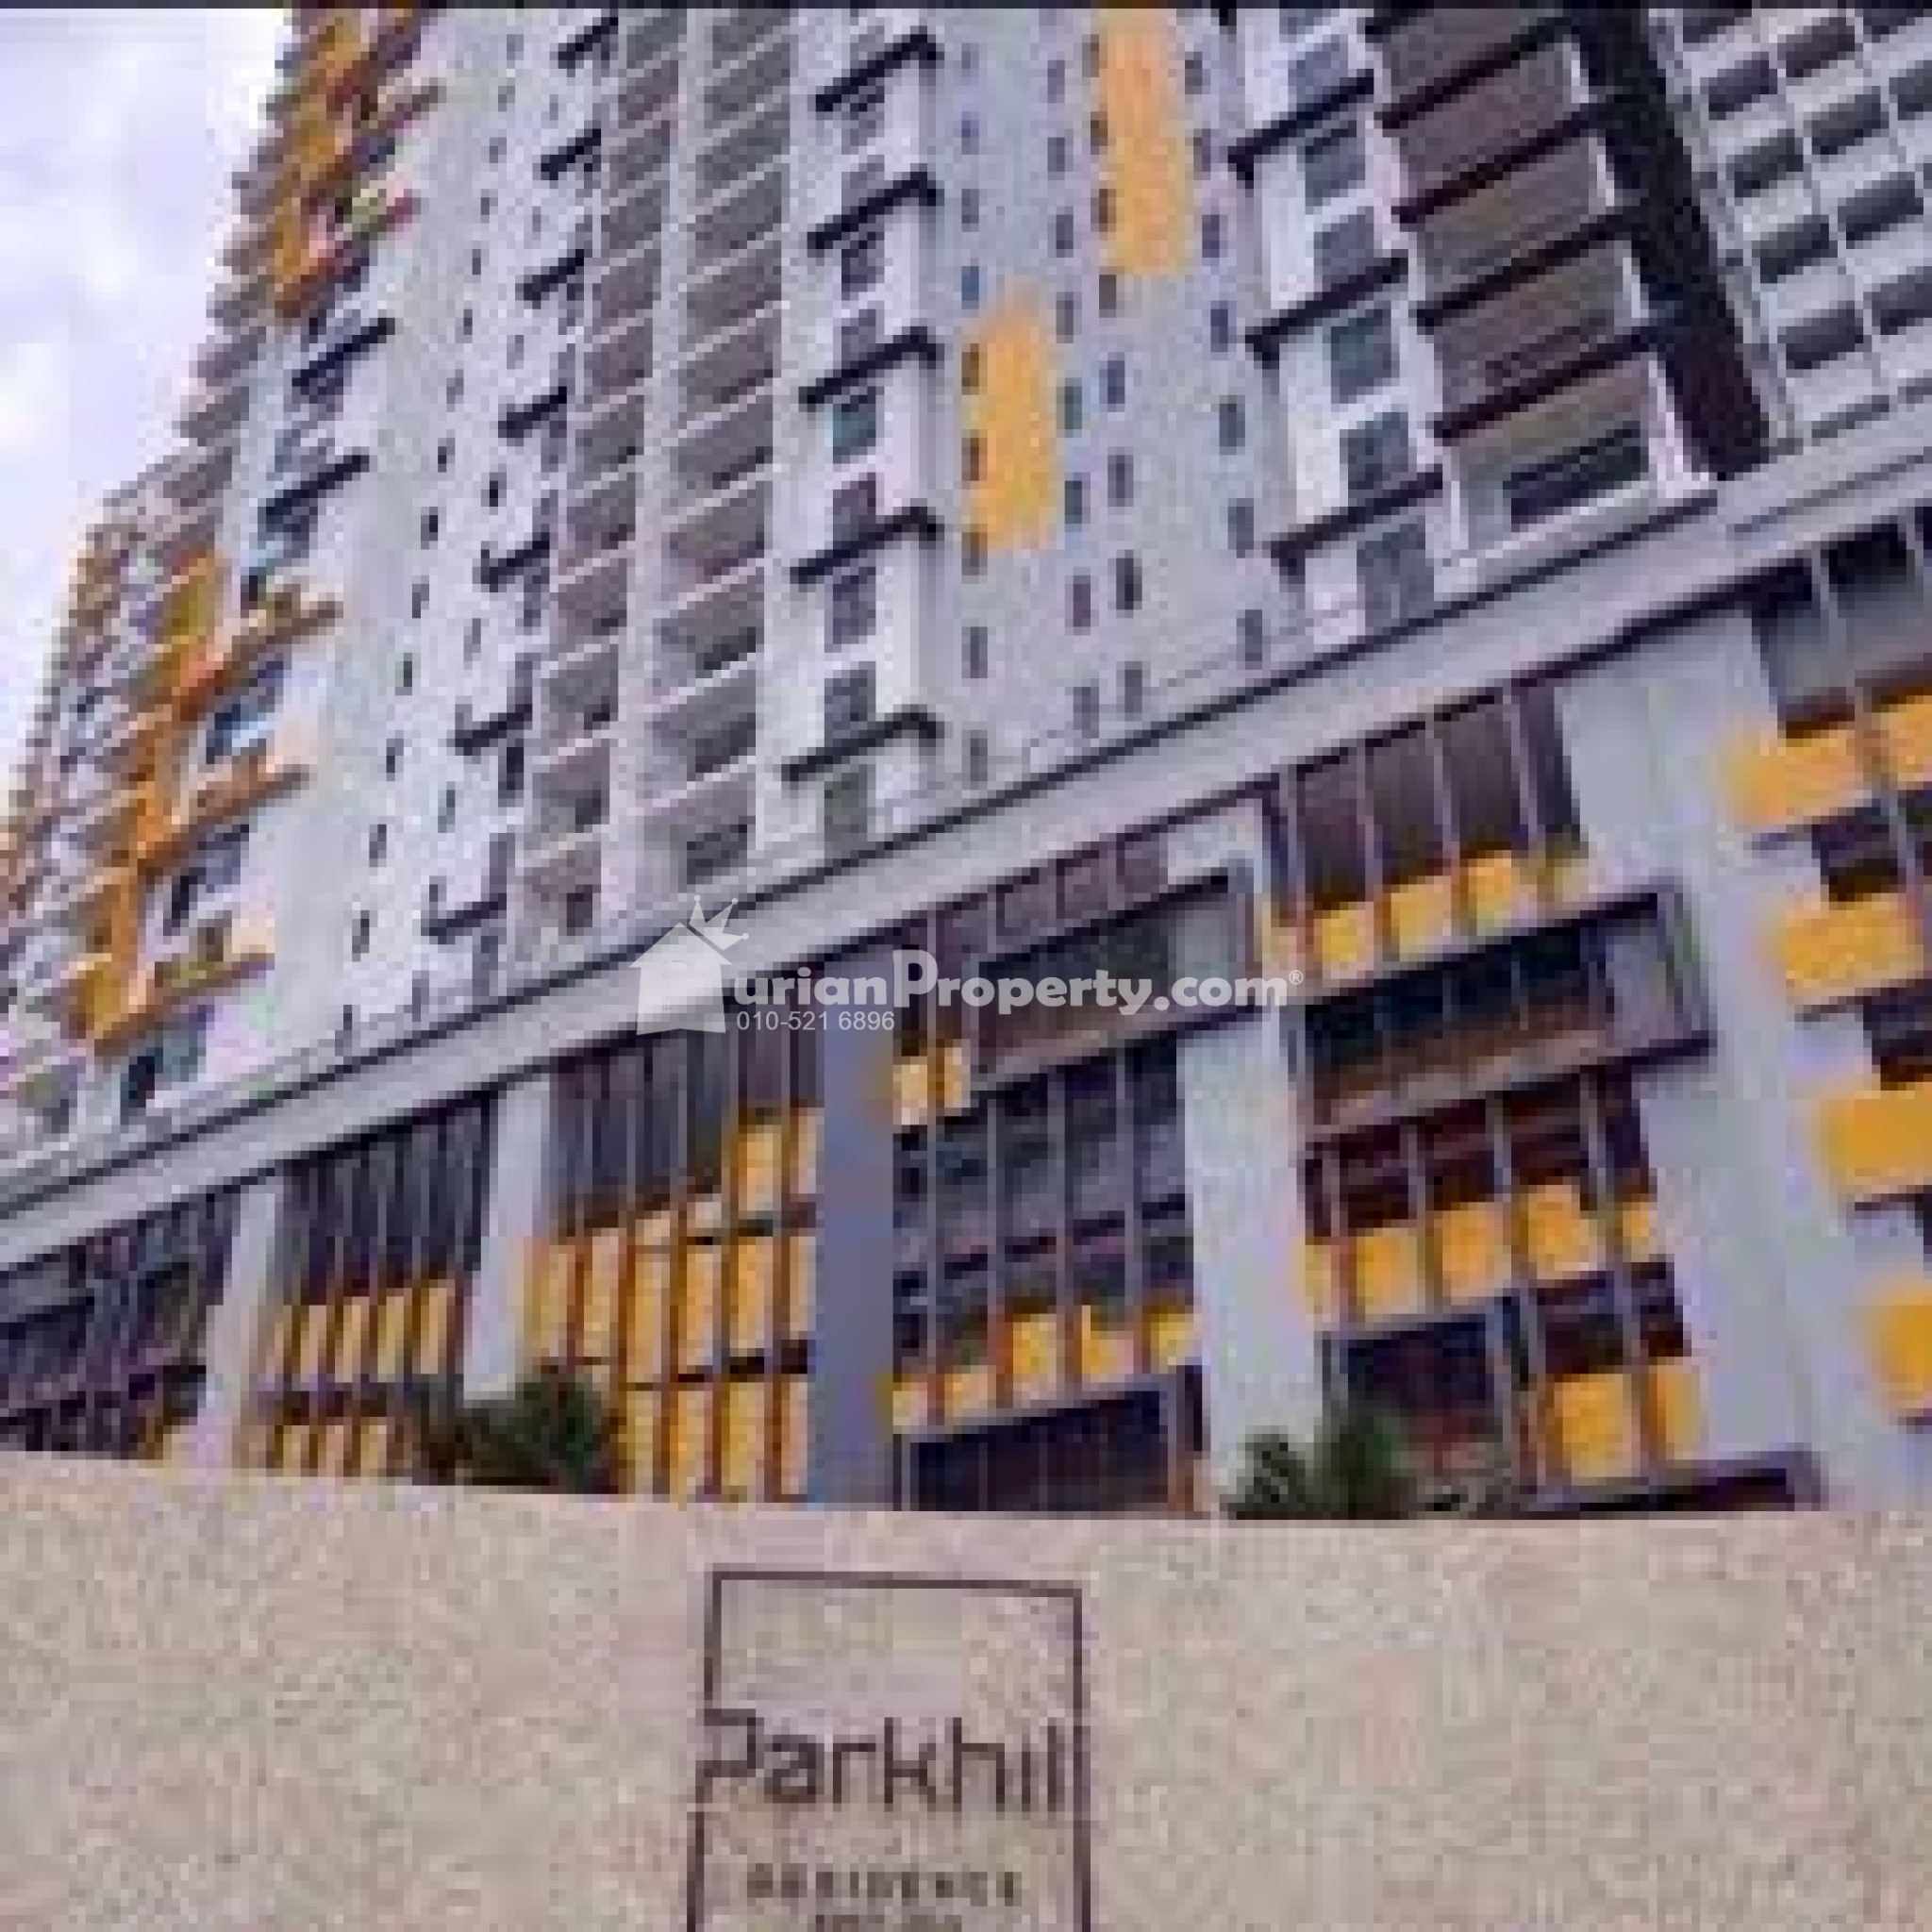 Condo For Sale at ParkHill Residence